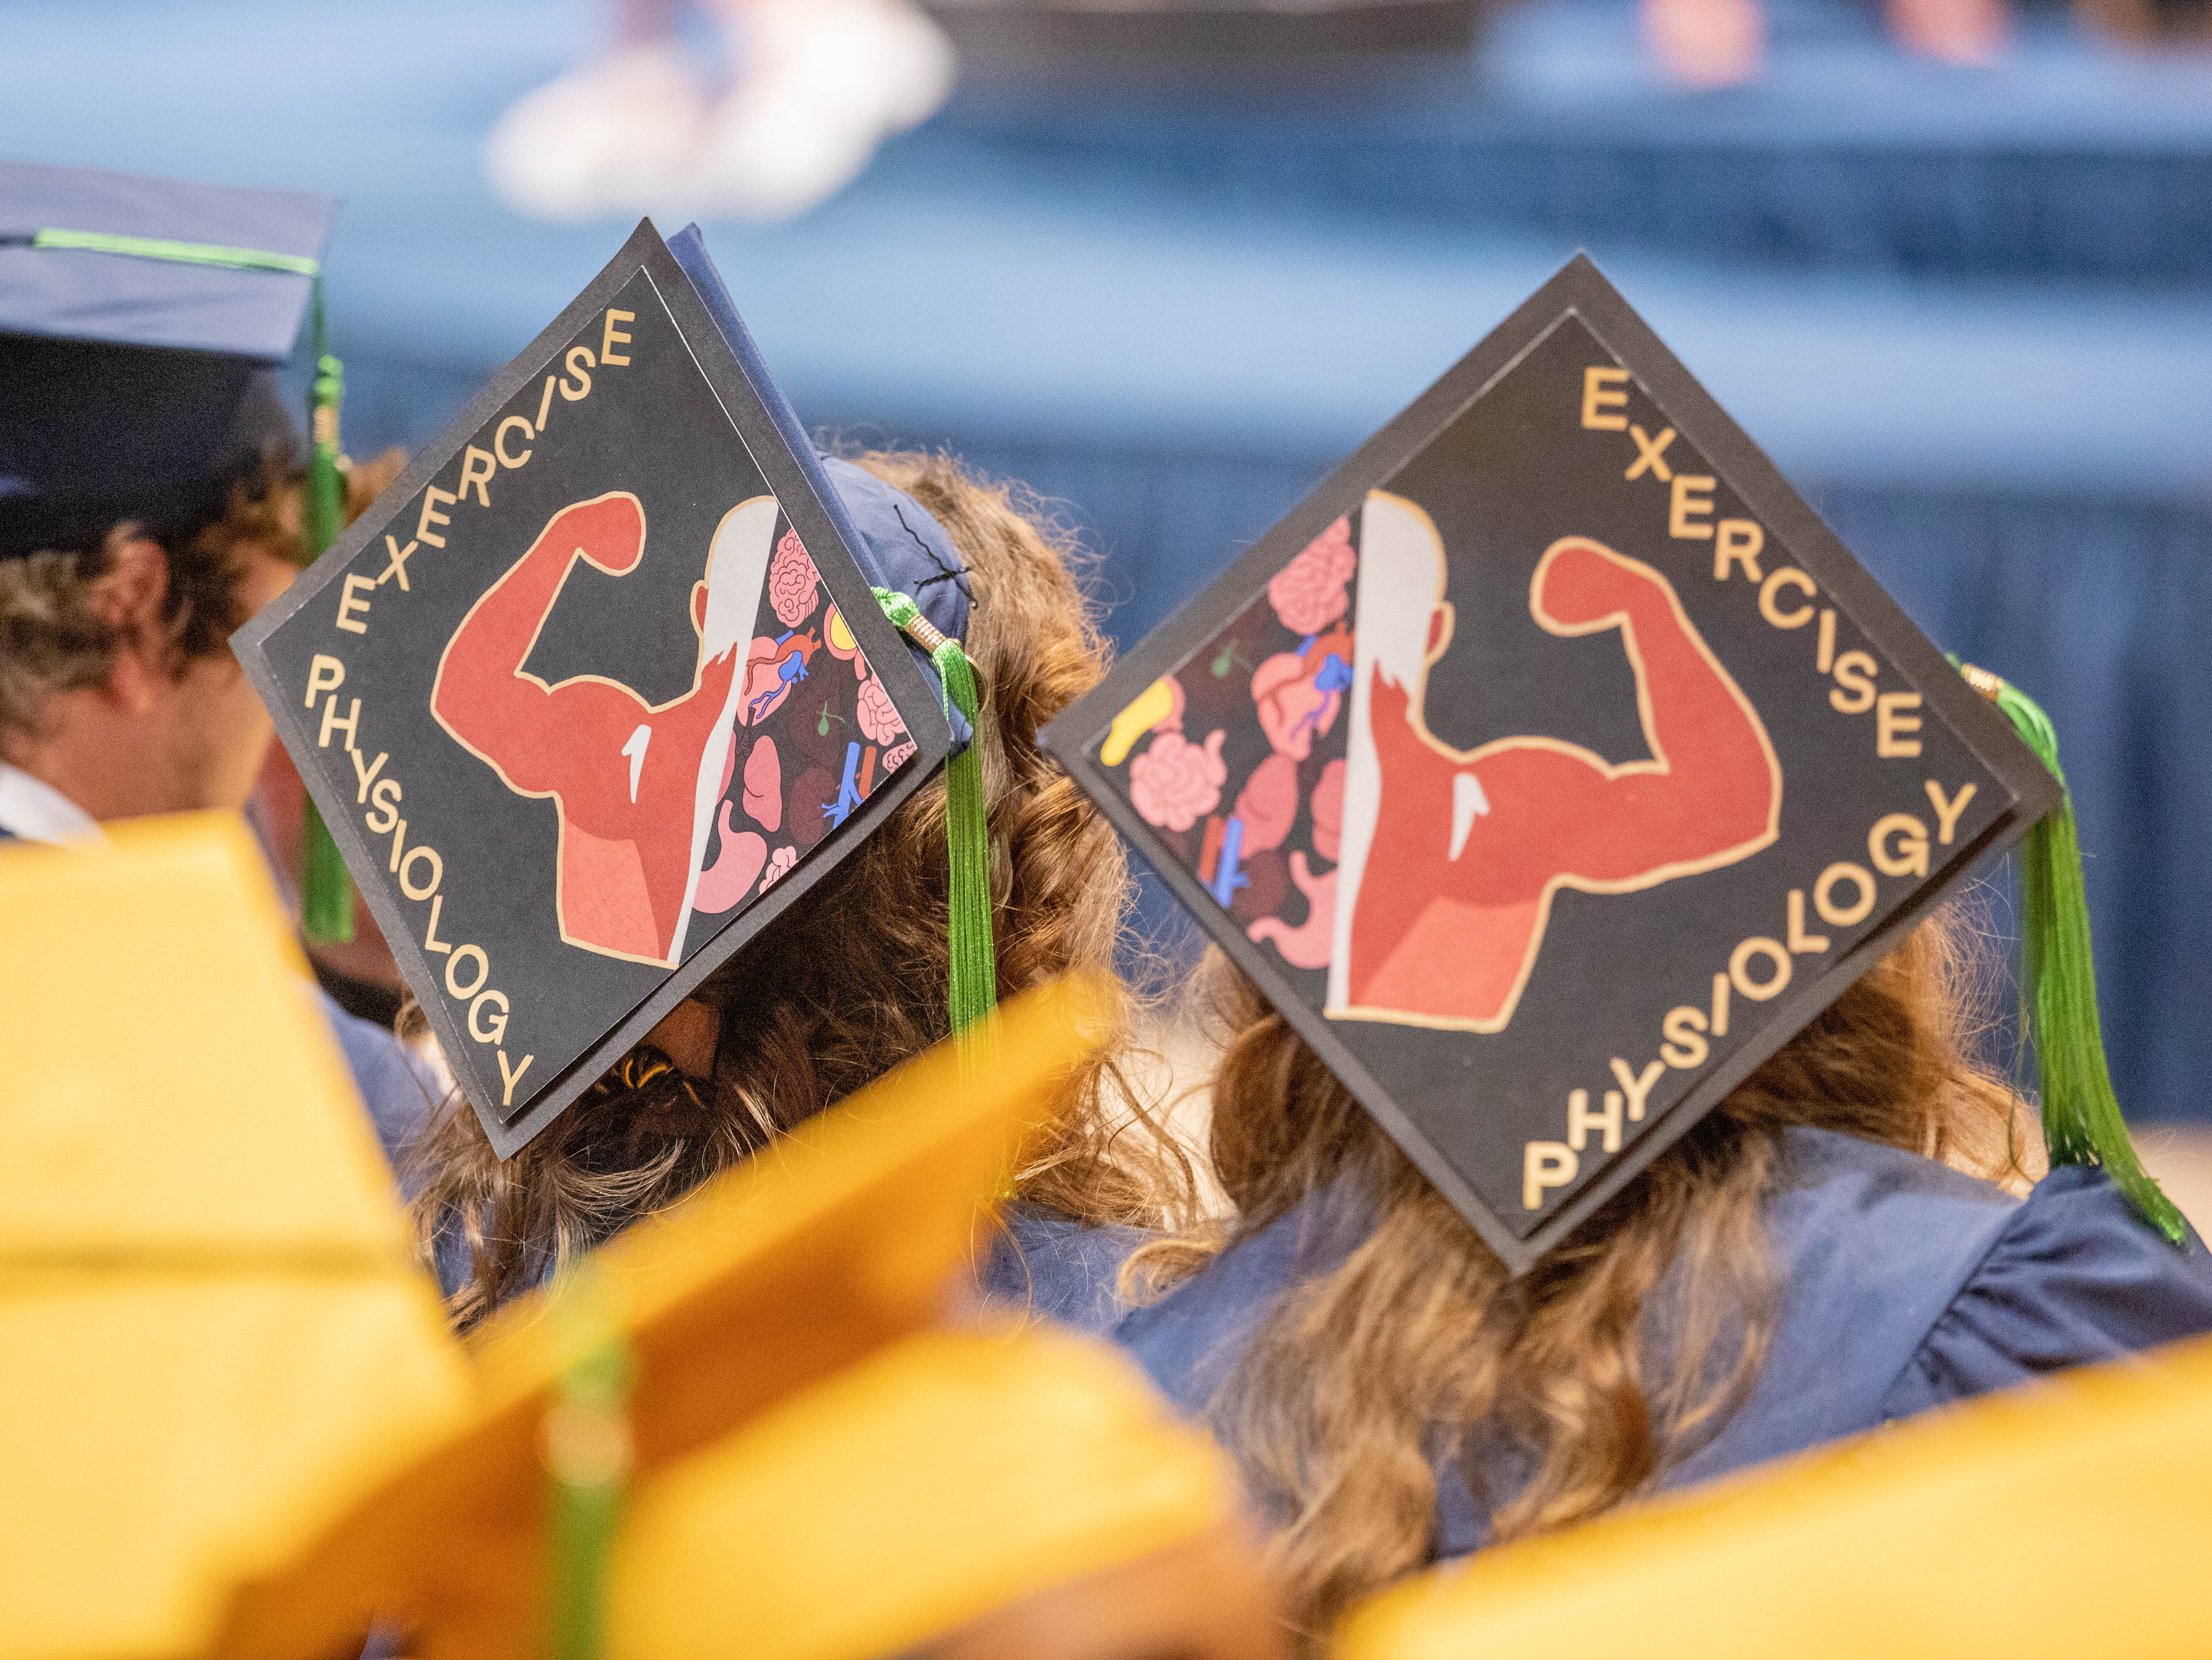 Graduation caps from spring commencement 2022 that read "exercise physiology"